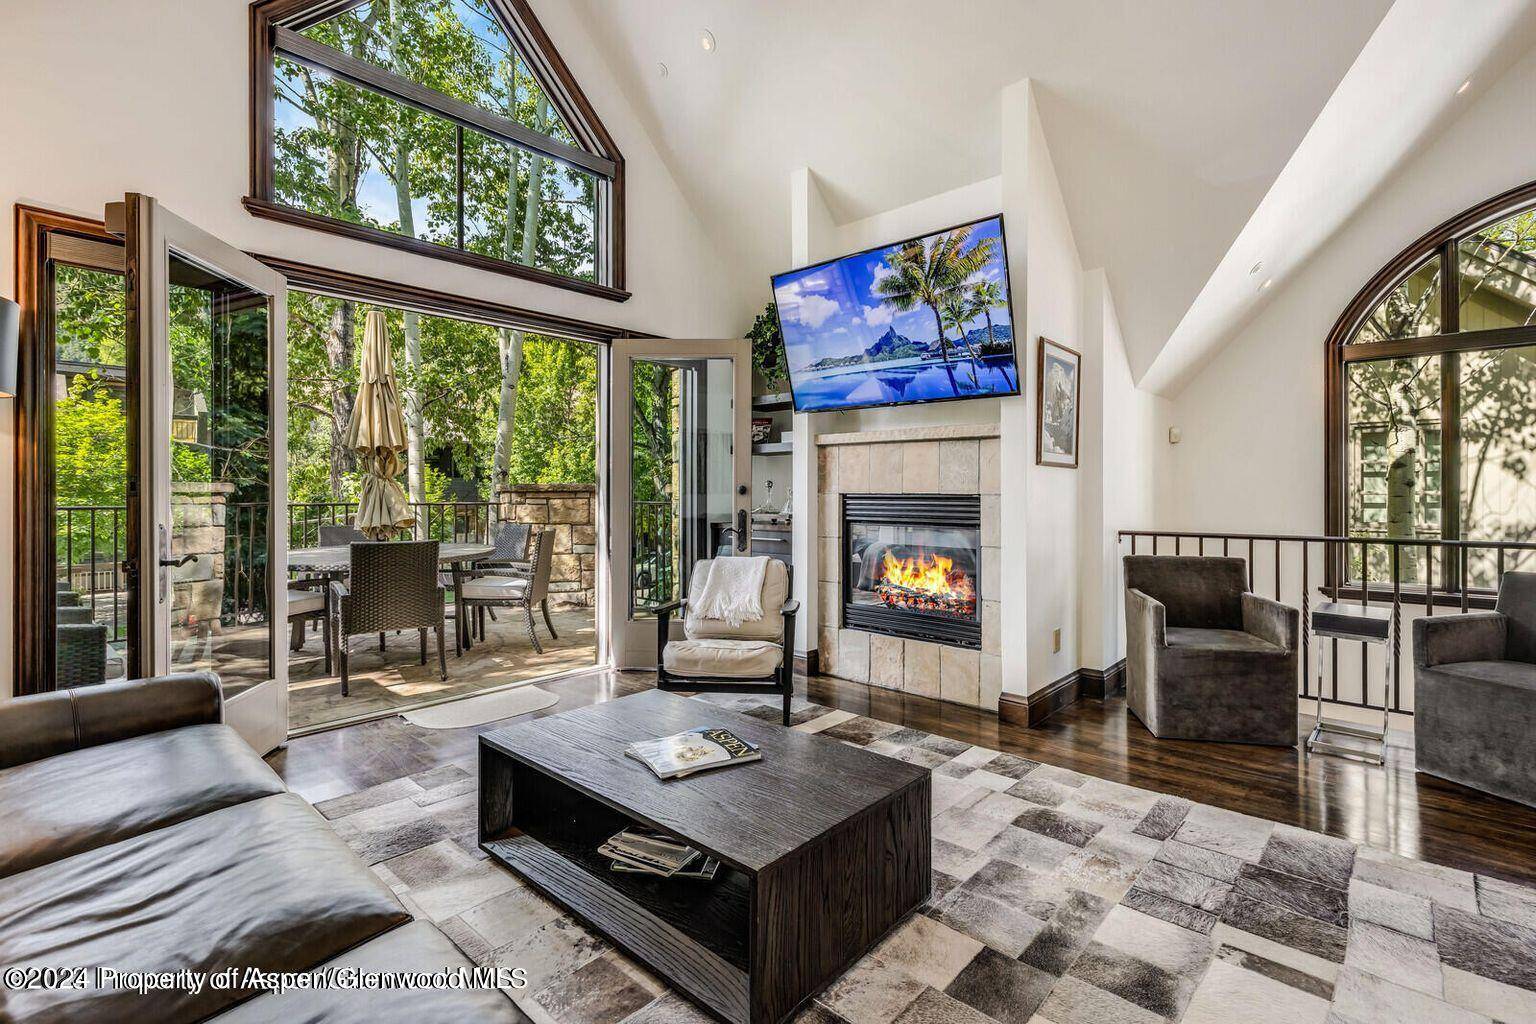 Located just 2 1 2 blocks from the Aspen Mountain Gondola, you can leave the cars in the garage as this recently refurbished 1 2 duplex lies within walking distance ...